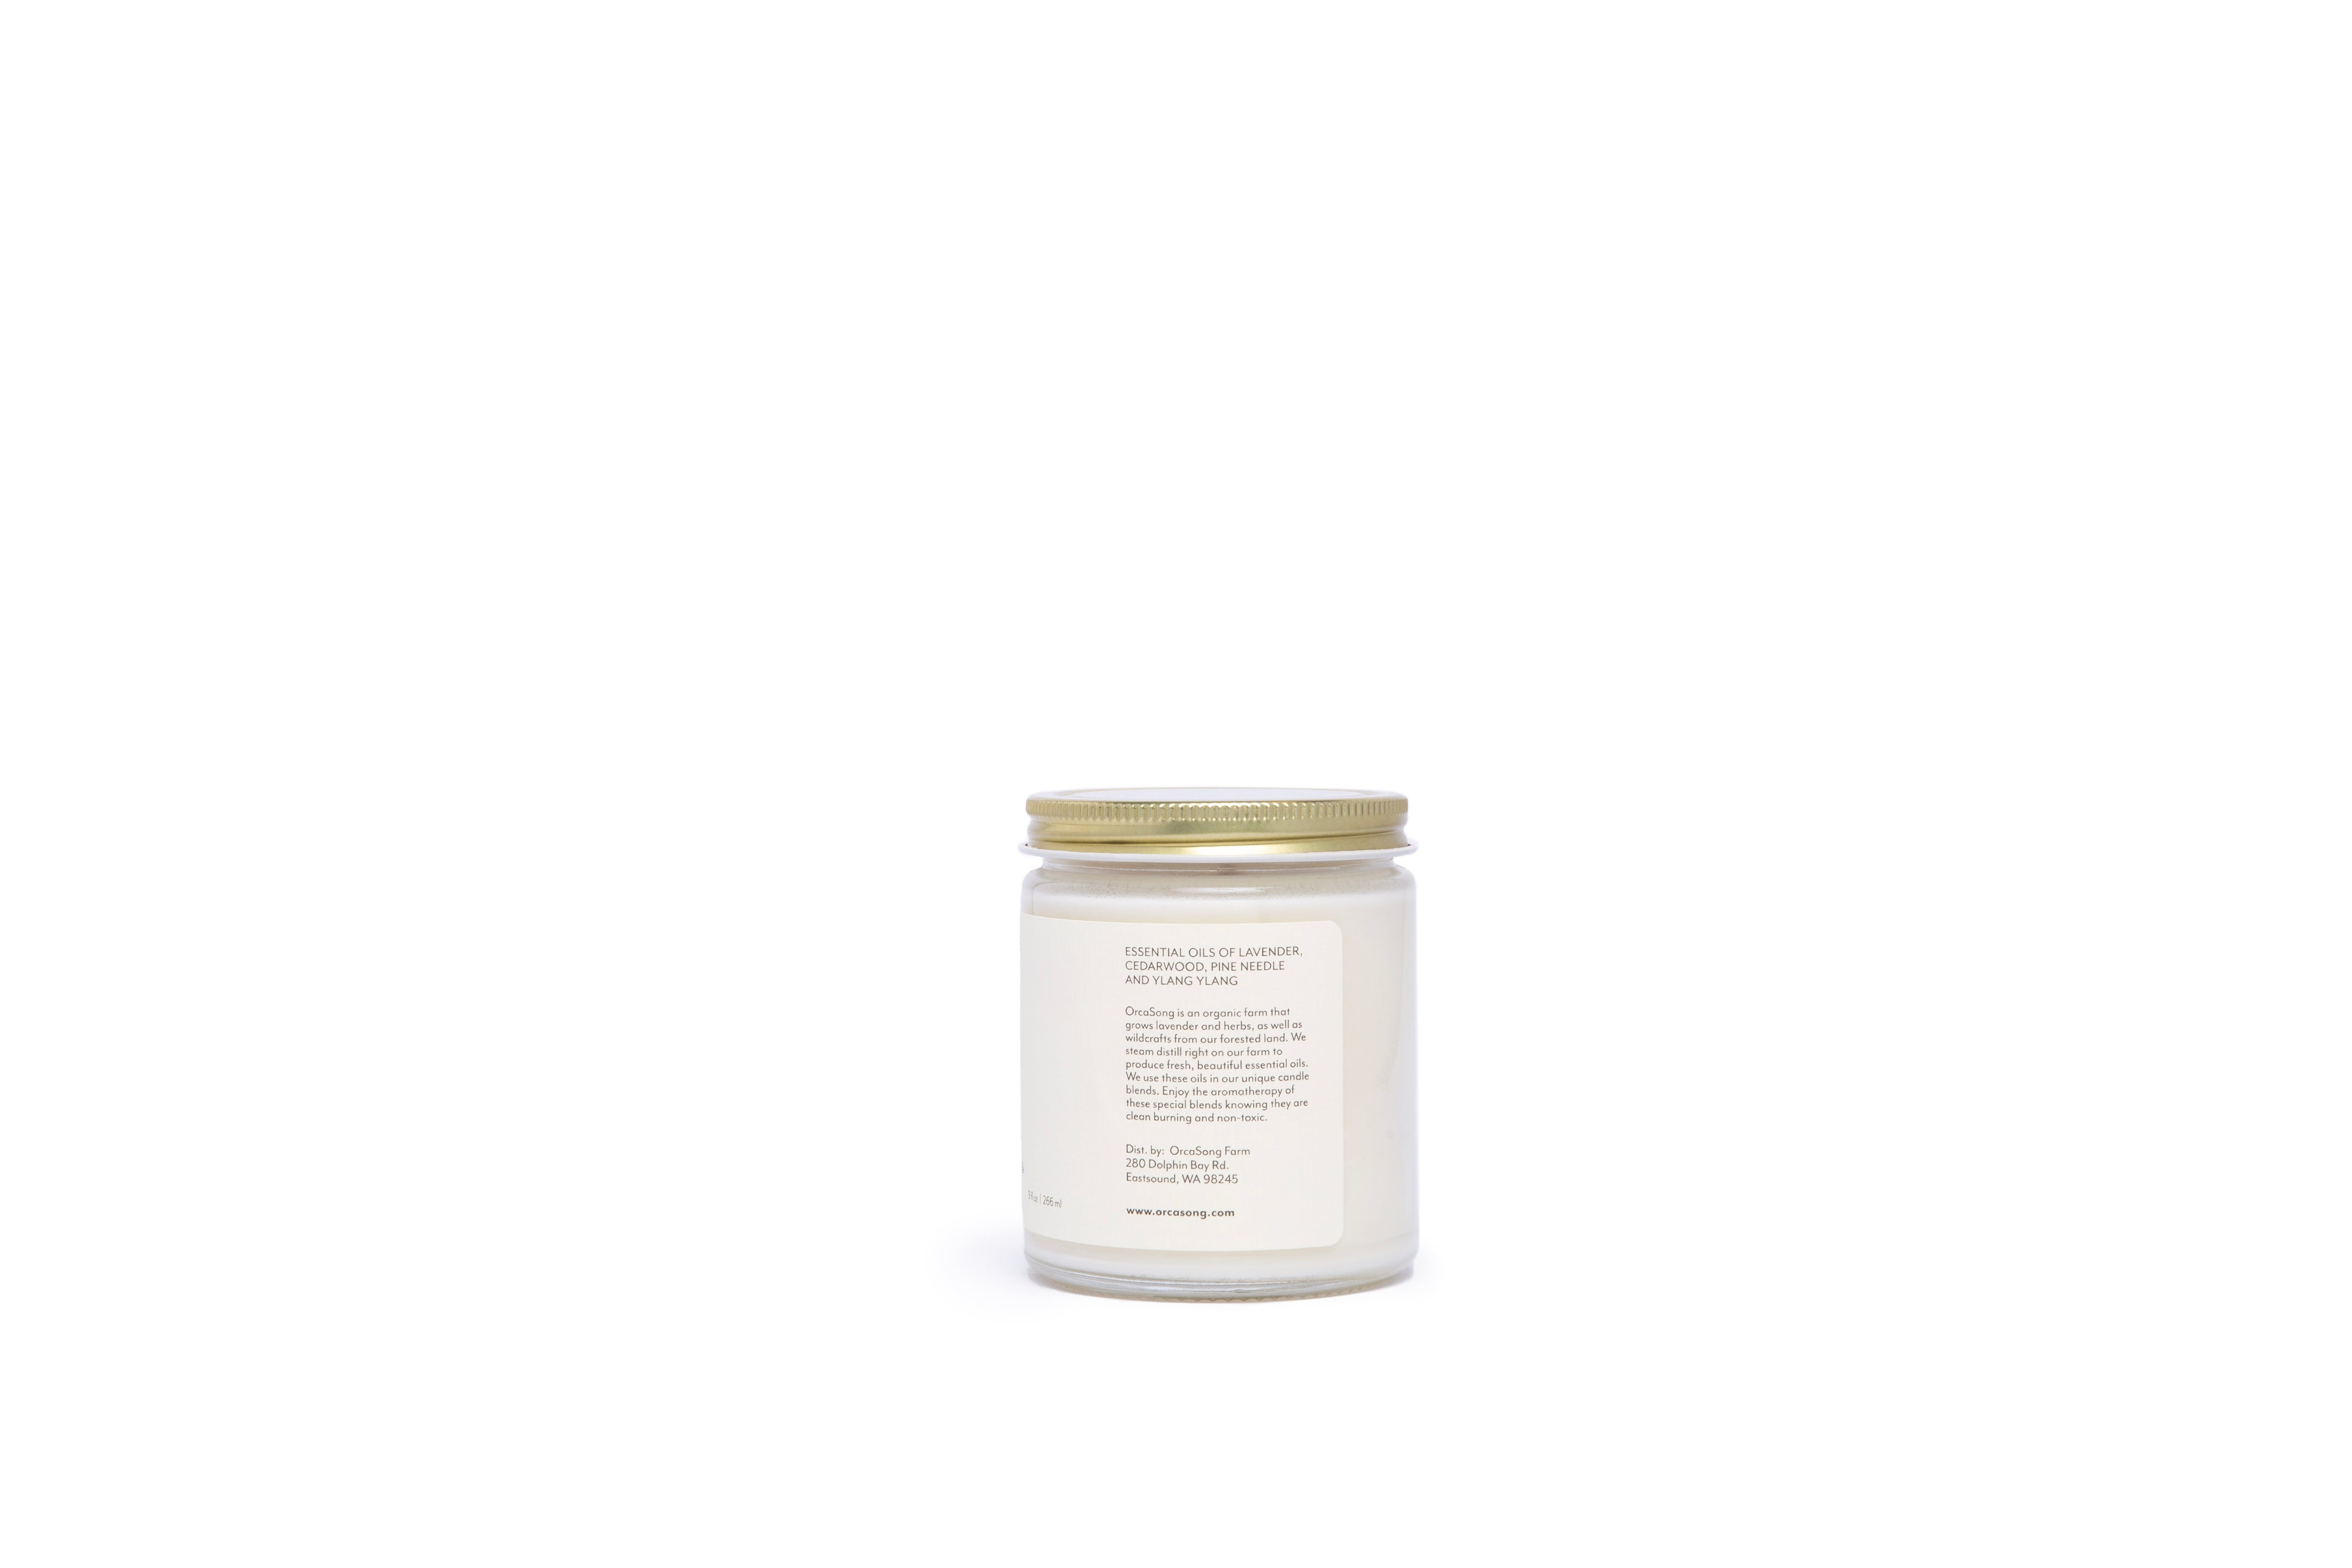 Lavender Woods Soy Candle